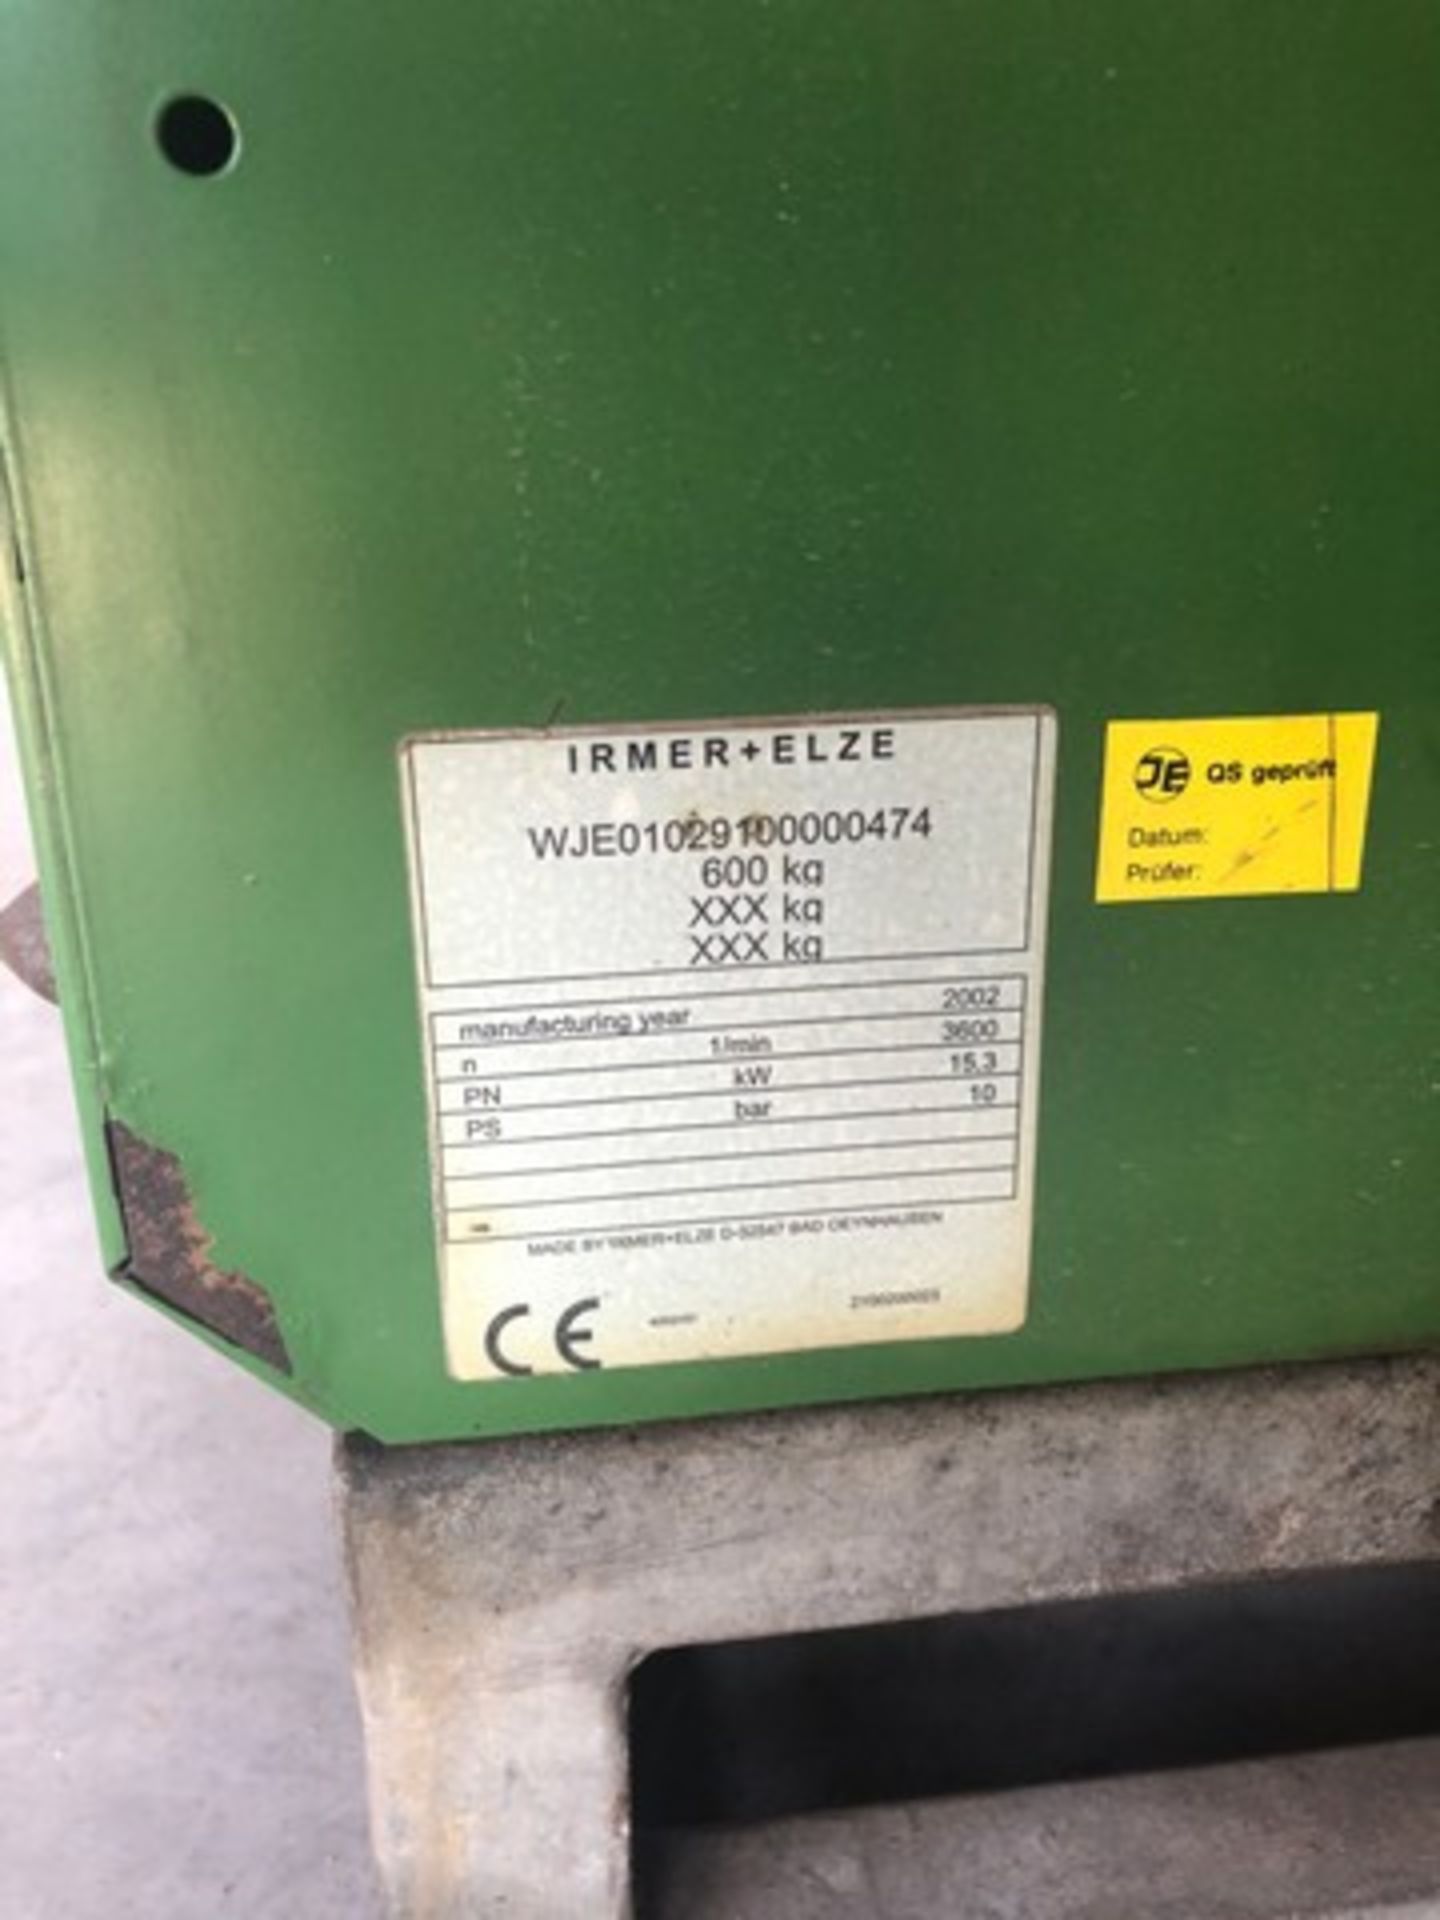 Irmer + Elze portable air compressor S.N WJE01029100000474 Year 2002 - Image 2 of 3